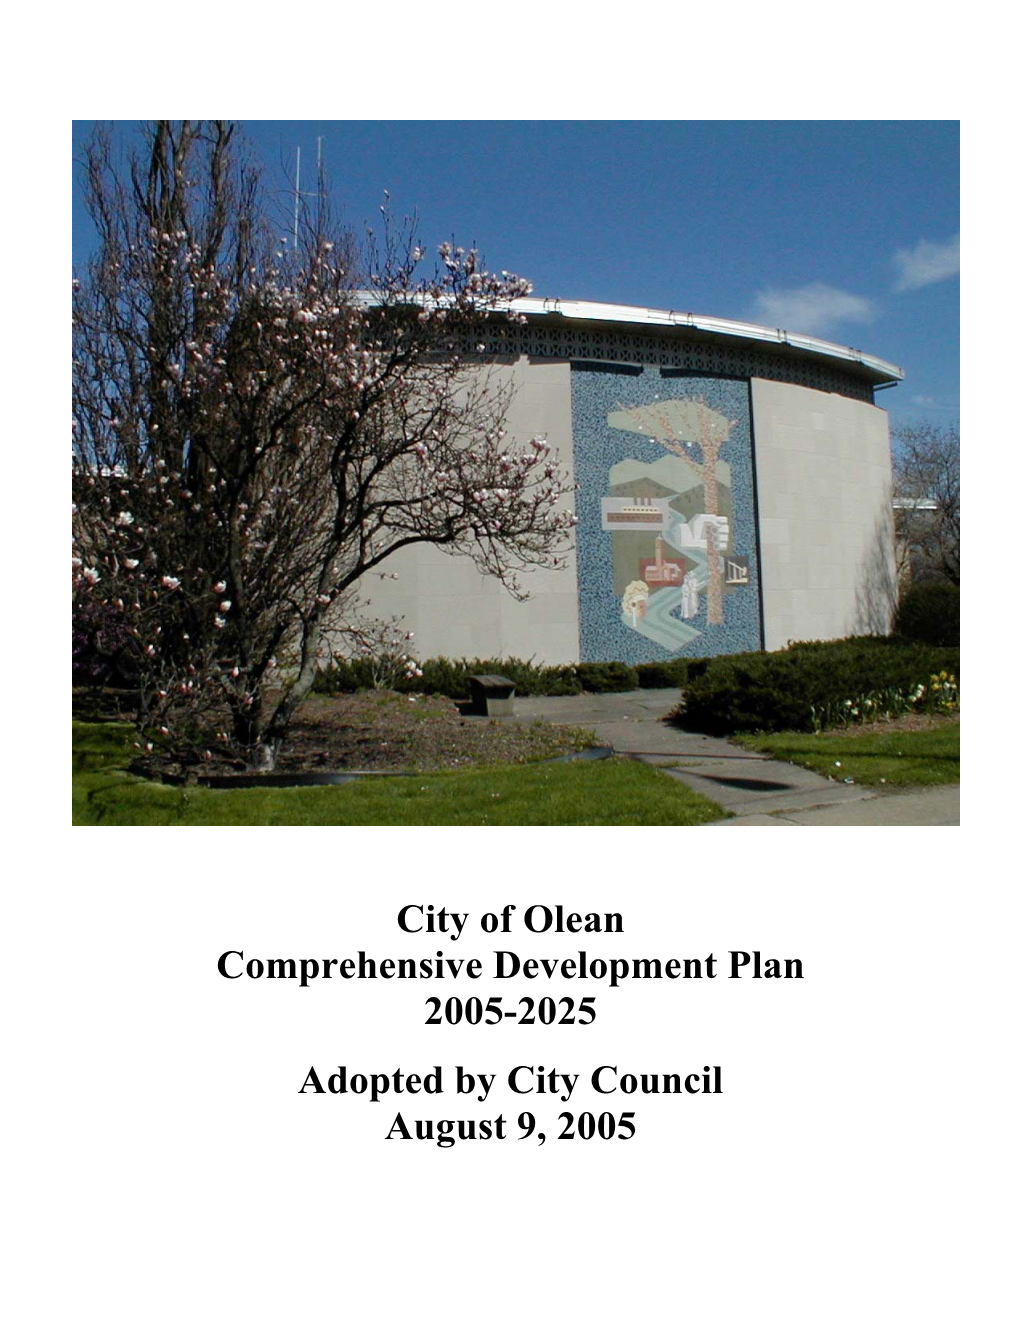 City of Olean Comprehensive Development Plan 2005-2025 Adopted by City Council August 9, 2005 Table of Contents